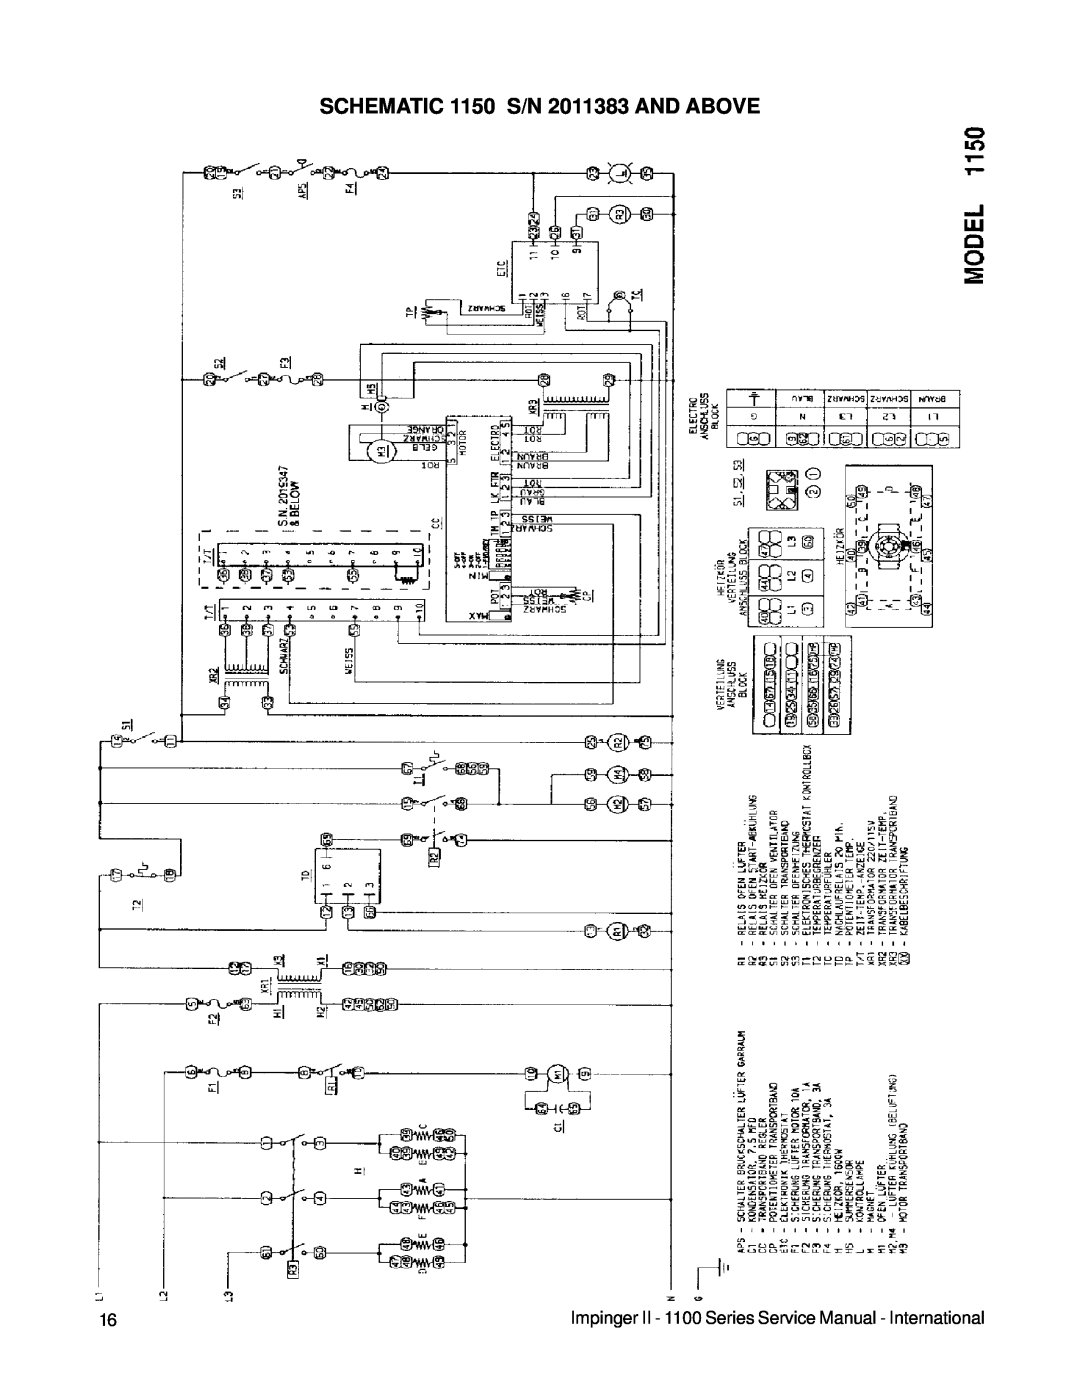 Lincoln 1100 Series service manual SCHEMATIC 1150 S/N 2011383 AND ABOVE 